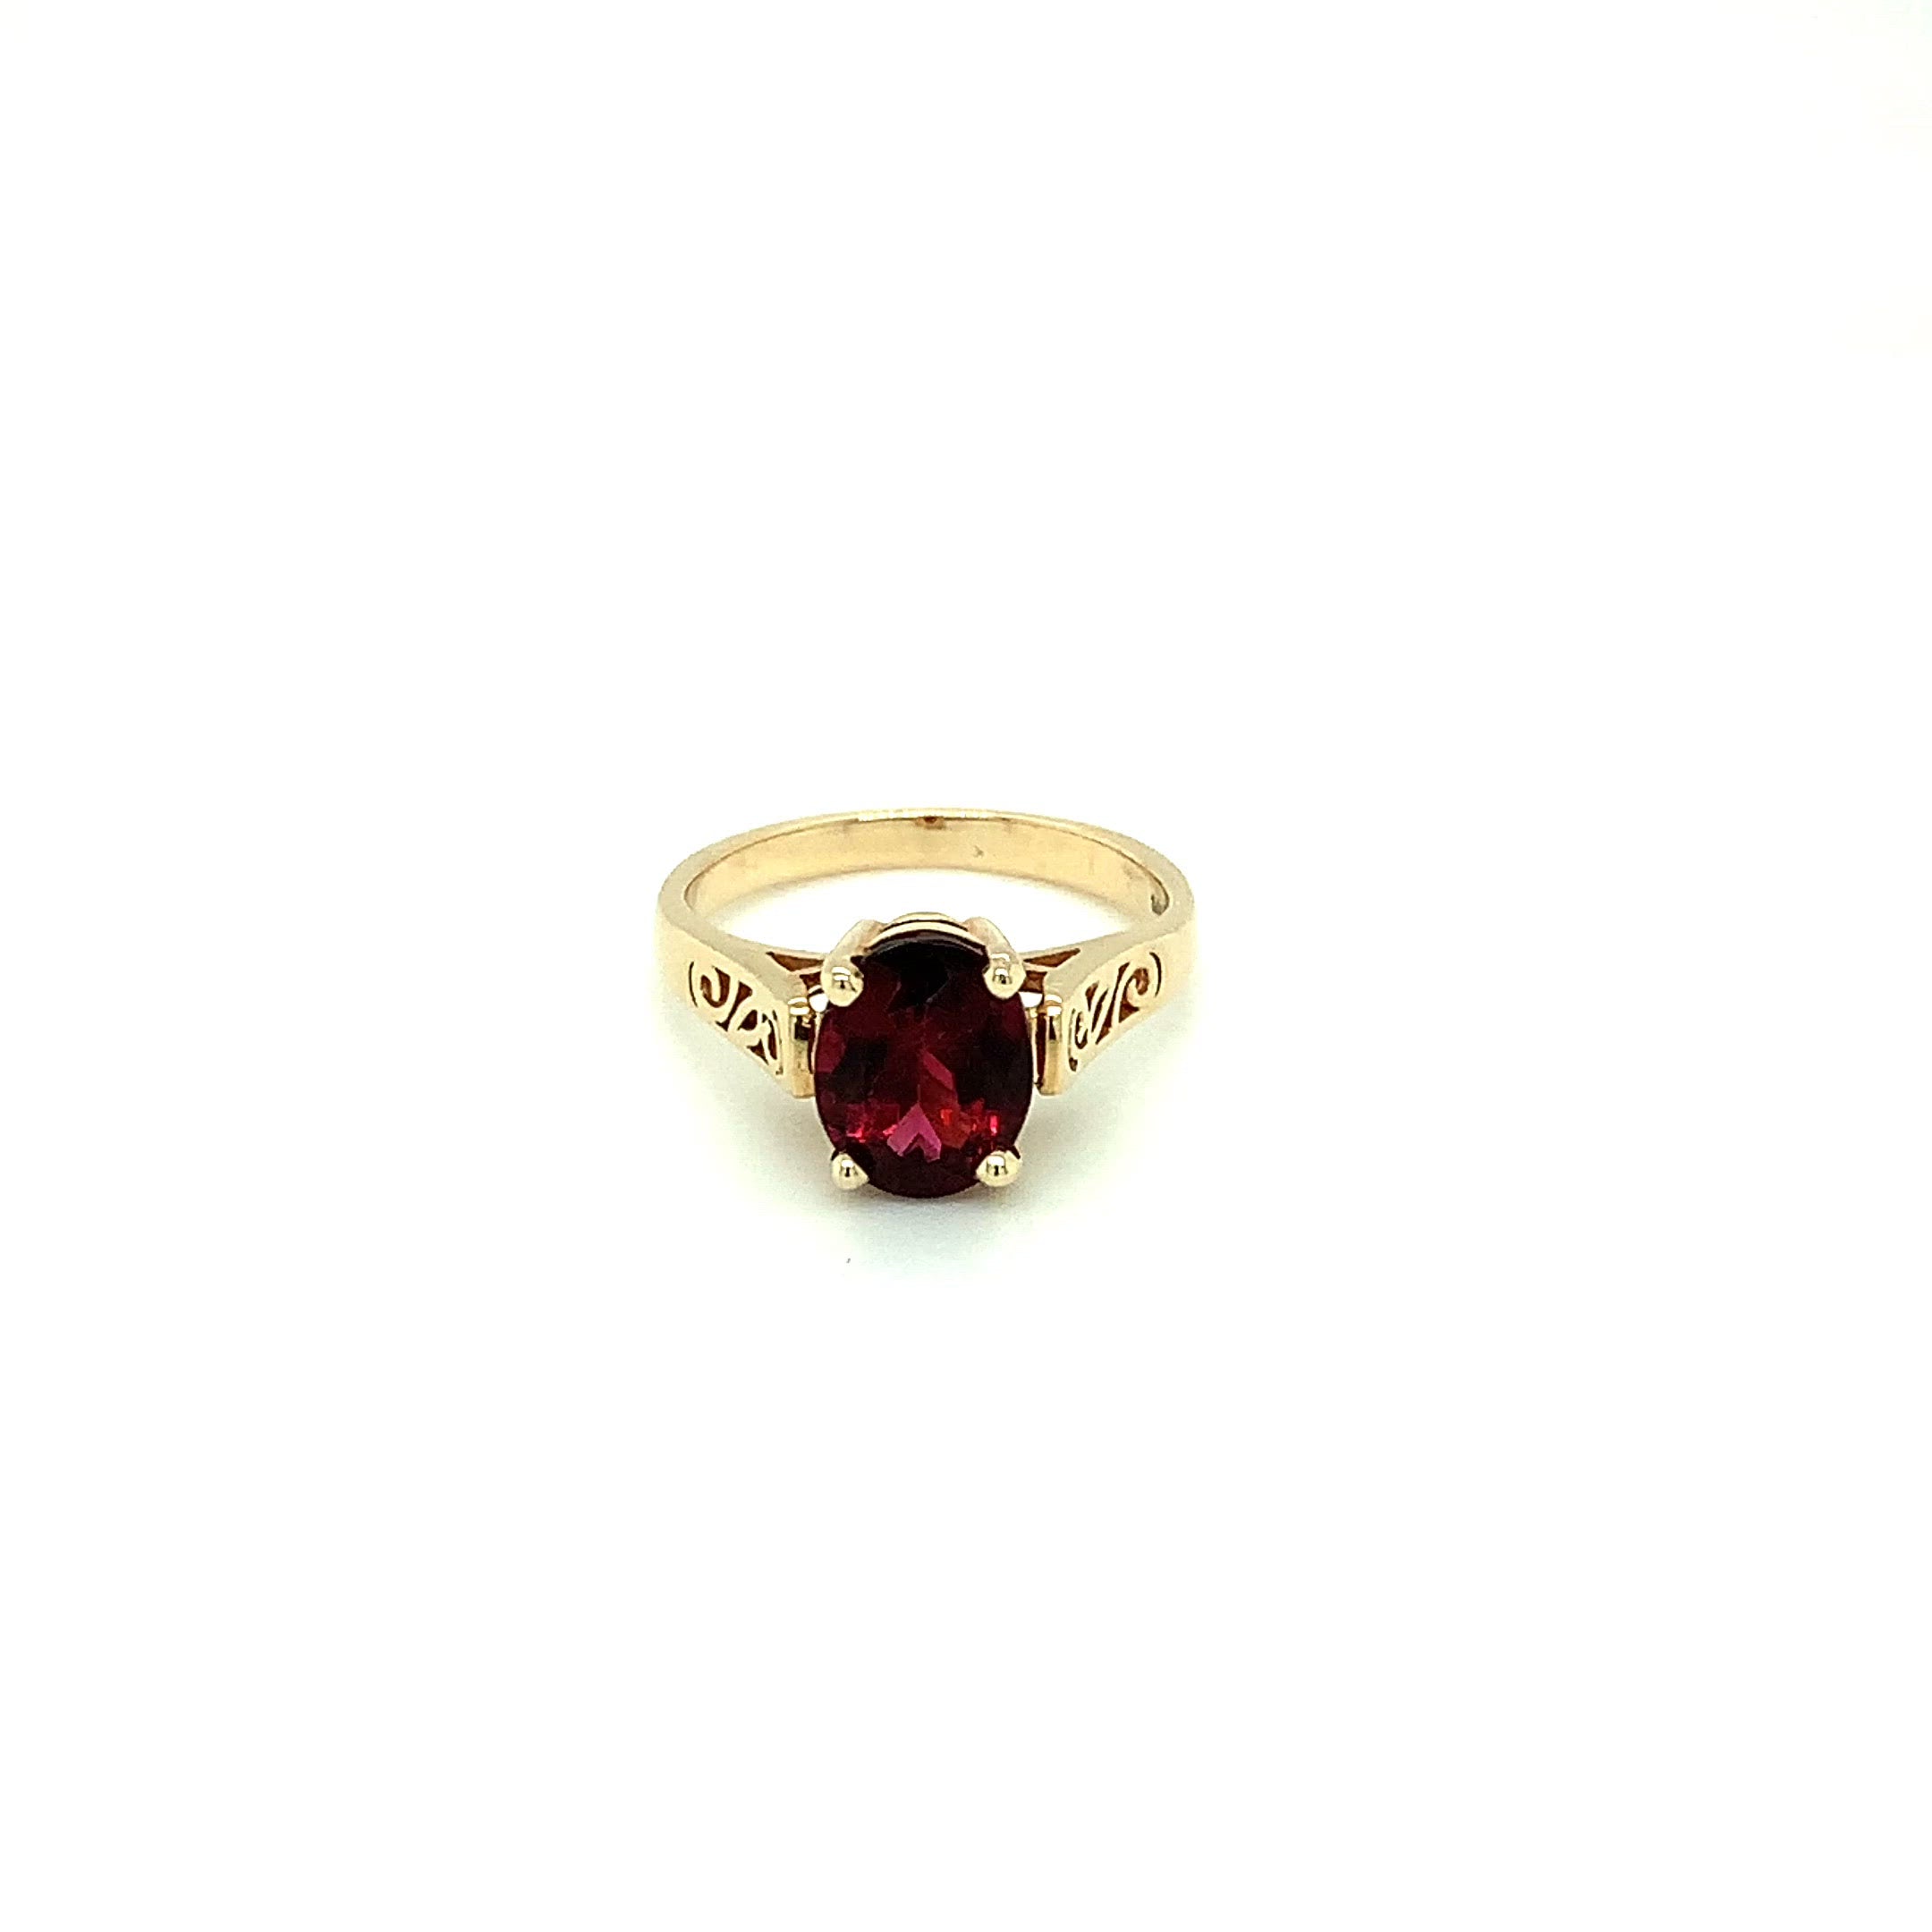 Natural Rubellite Ring 14K Solid Gold 1.90ct Pink Tourmaline Ring Solitaire Ring Vintage Ring Antique Ring Women's Ring Fine Estate Jewelry